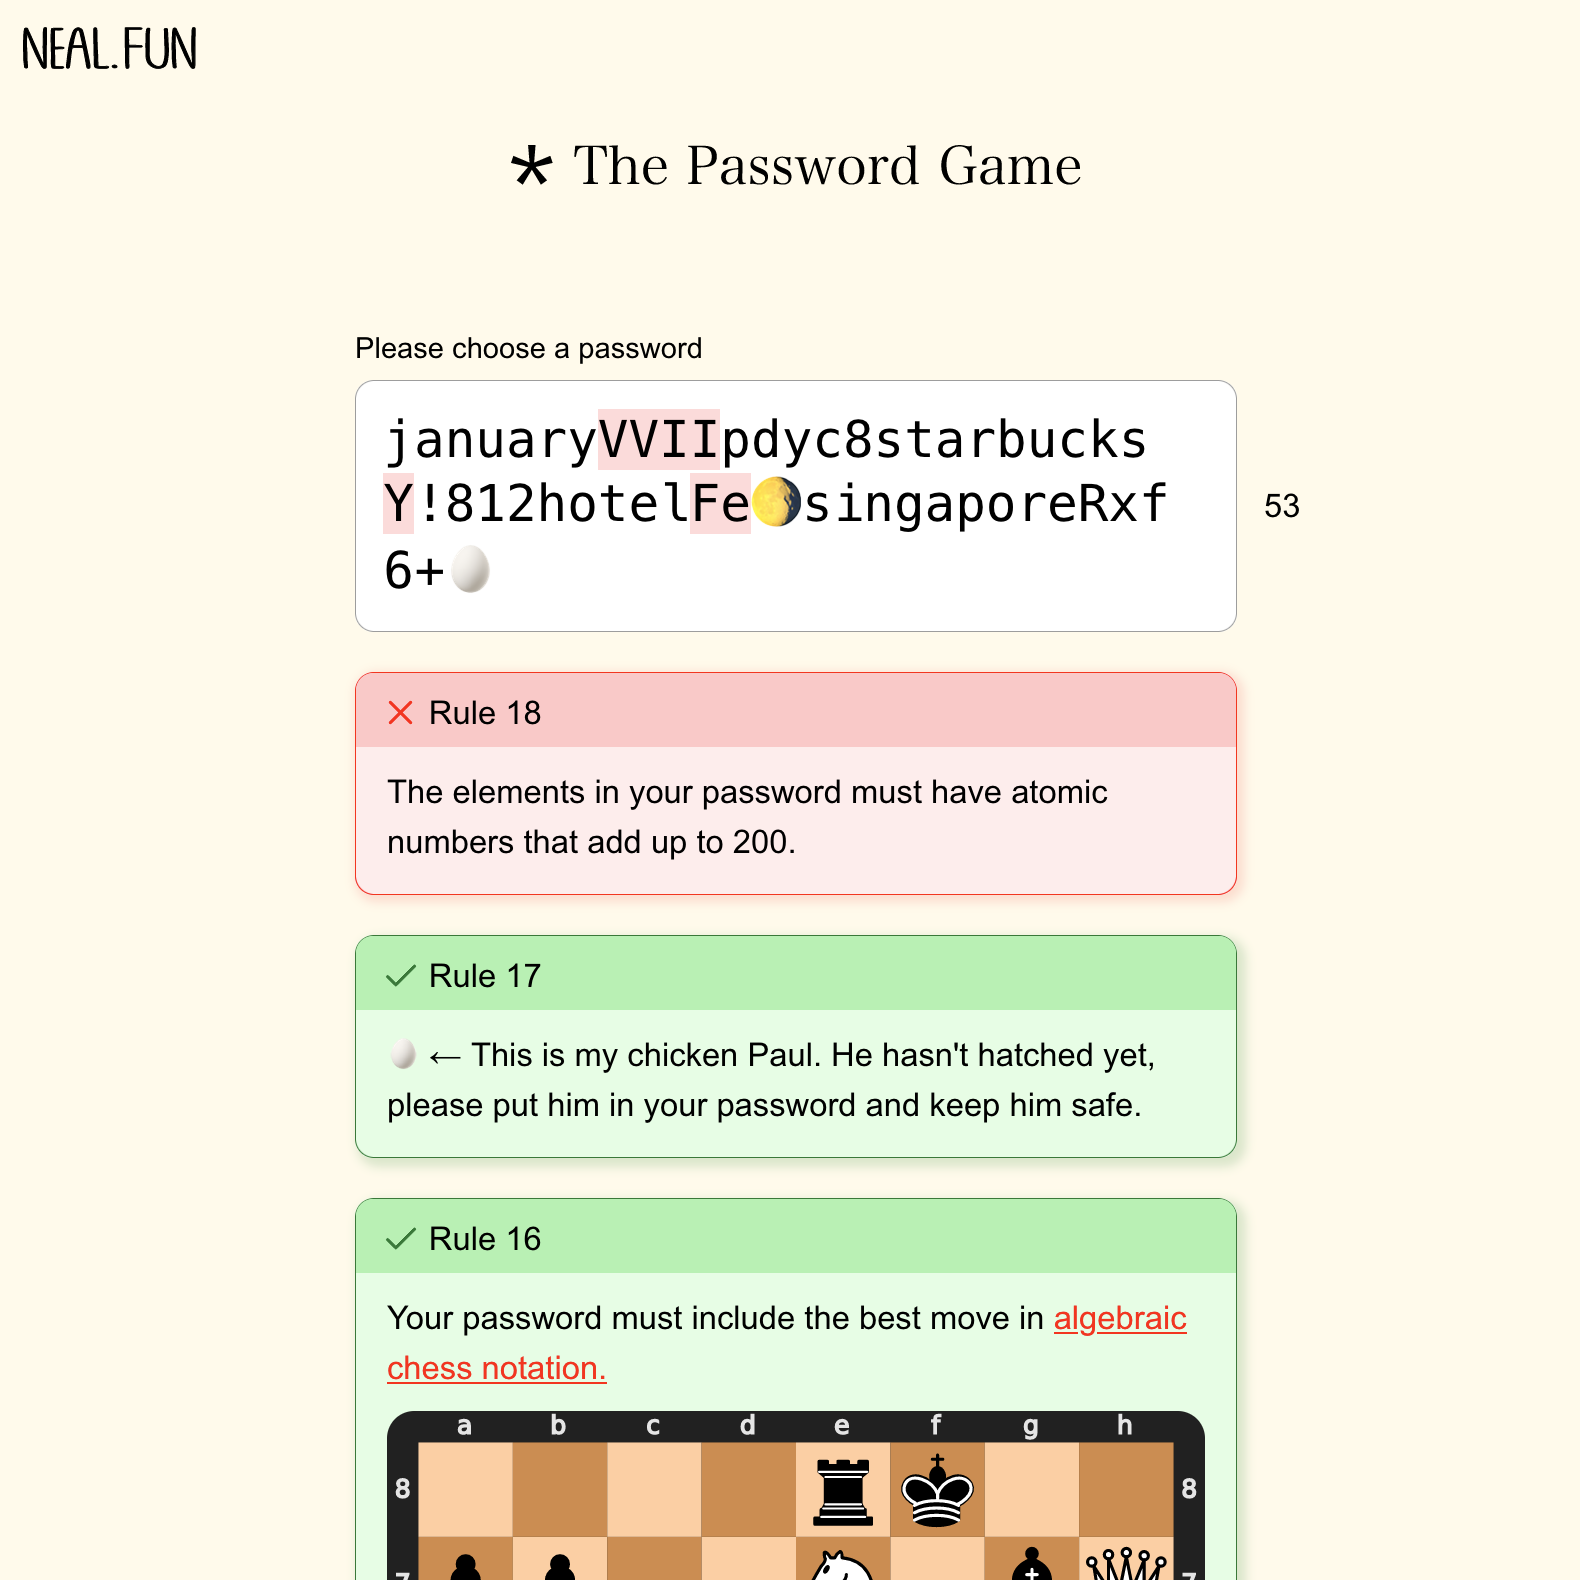 Screenshot of The Password Game with Rule 18 unsolved